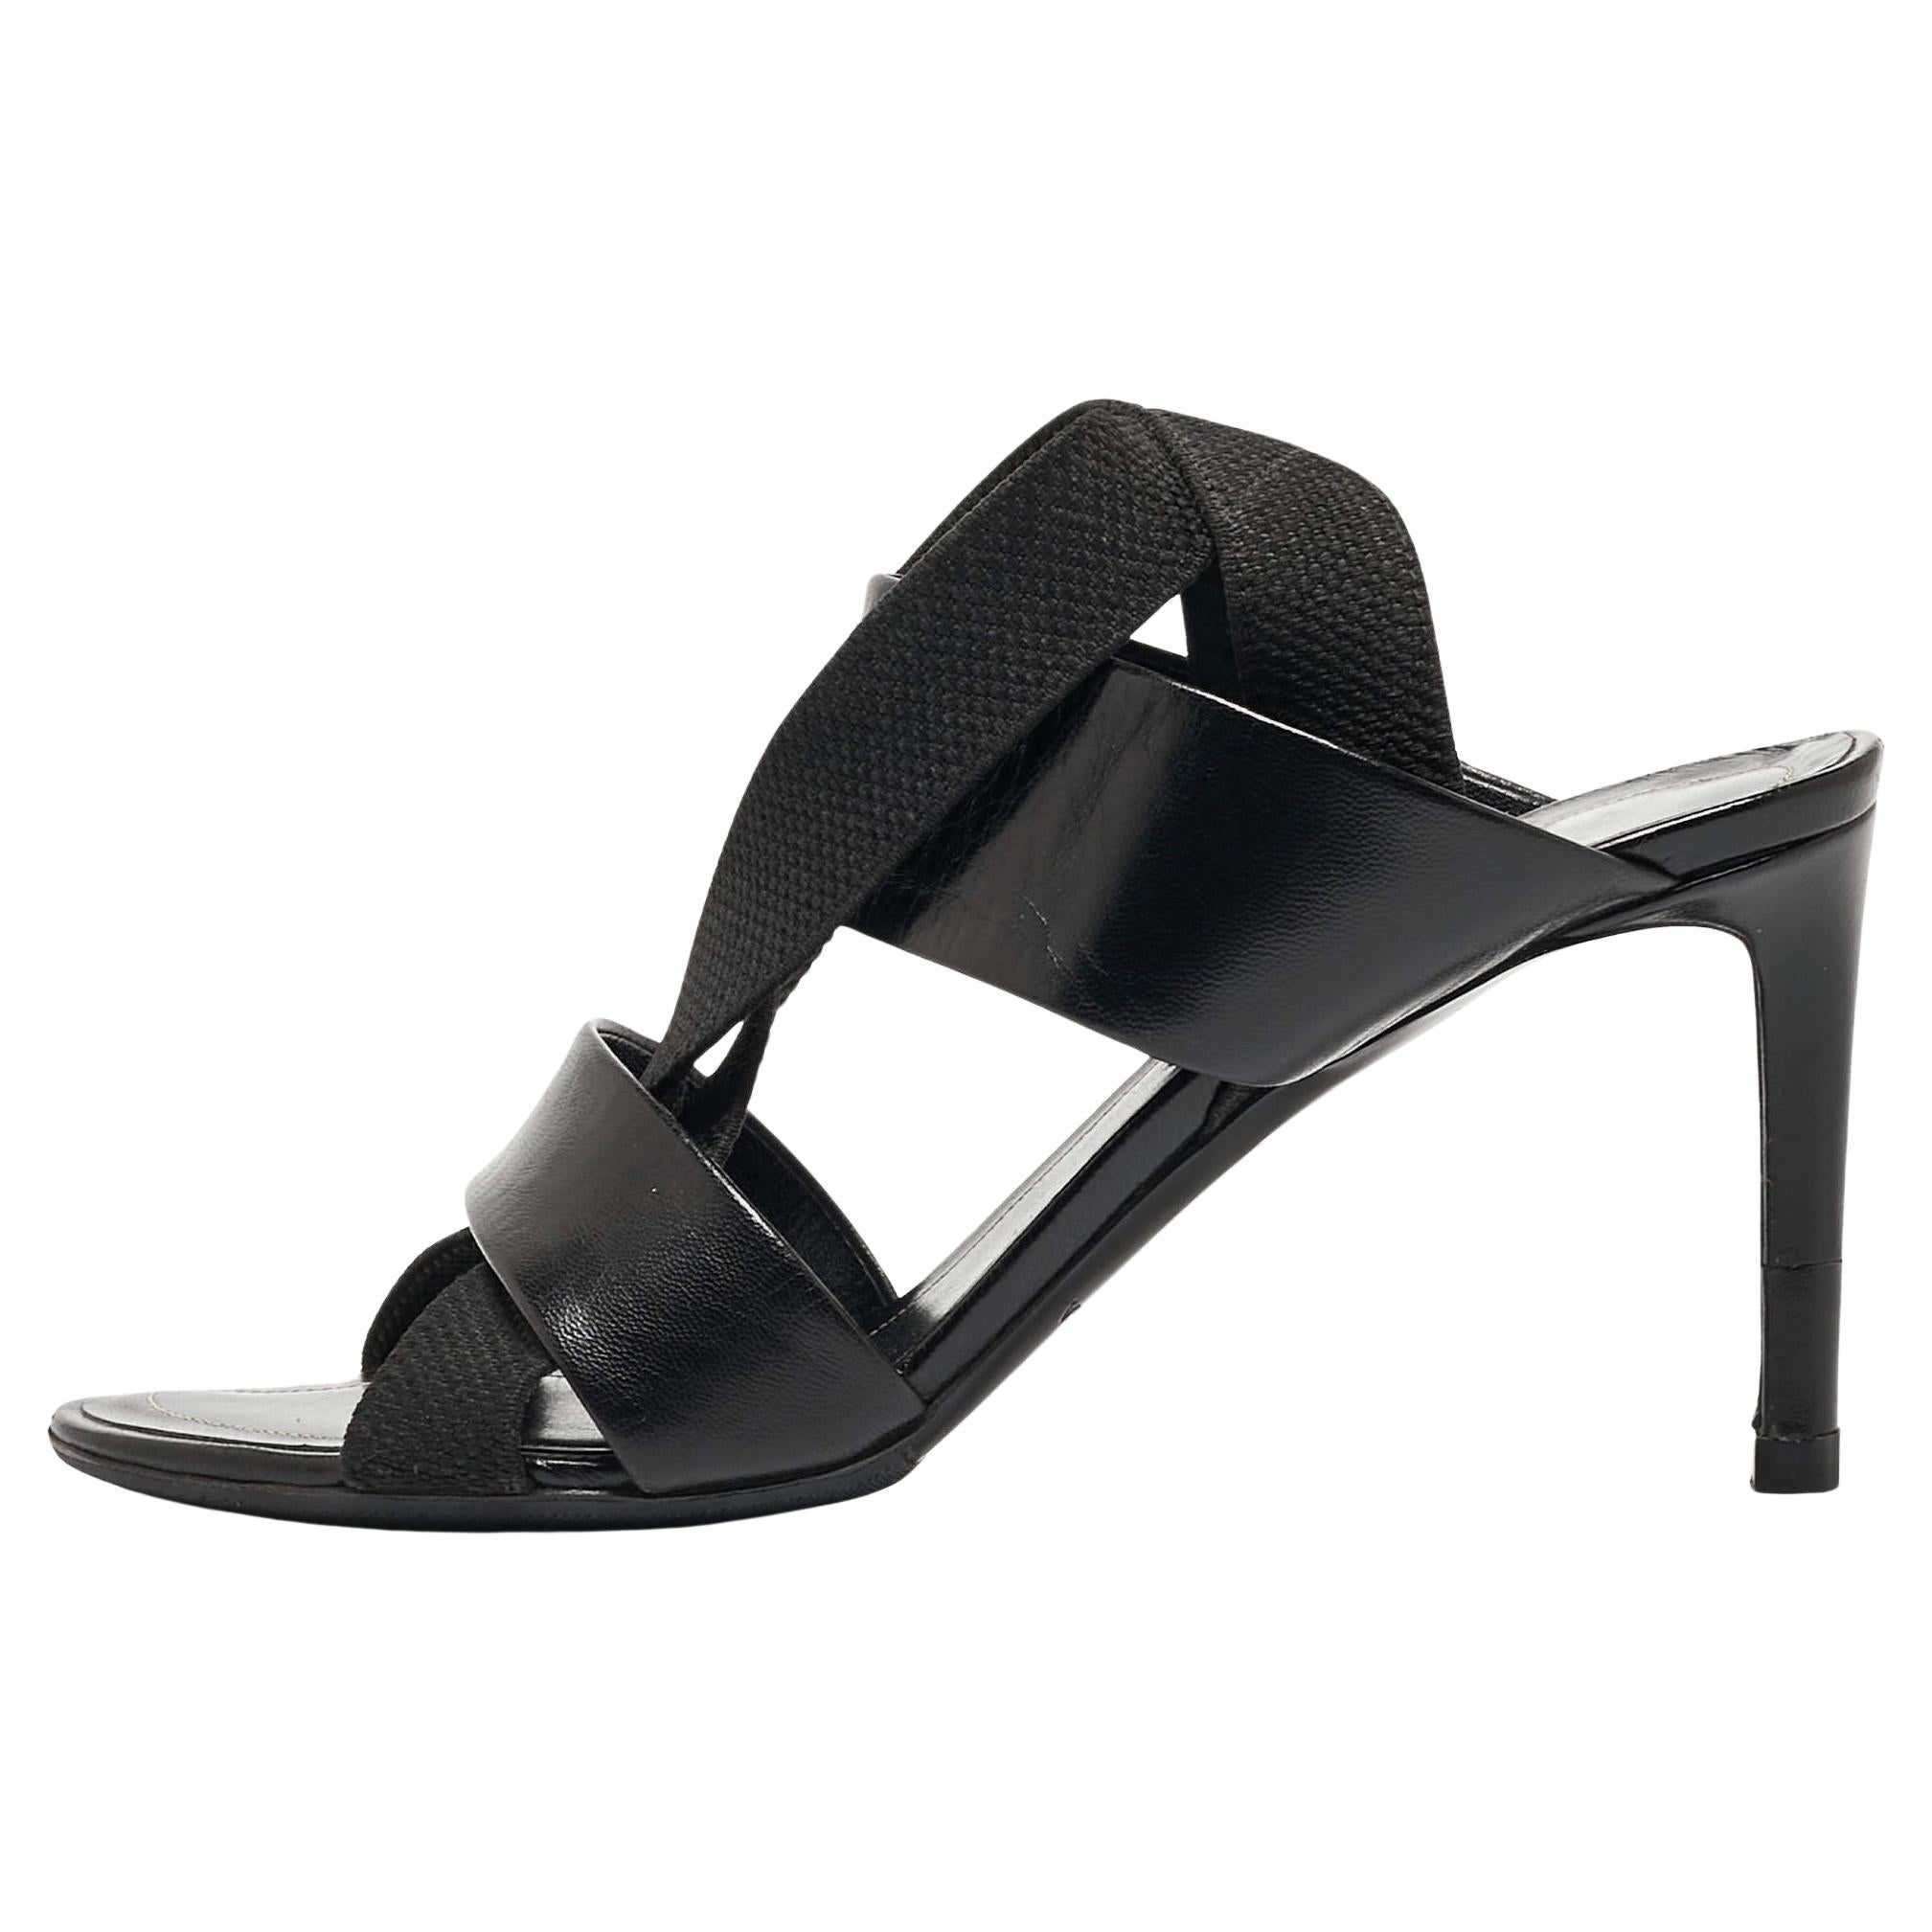 Balenciaga Black Leather and Elastic Strappy Slingback Sandals Size 36 For Sale